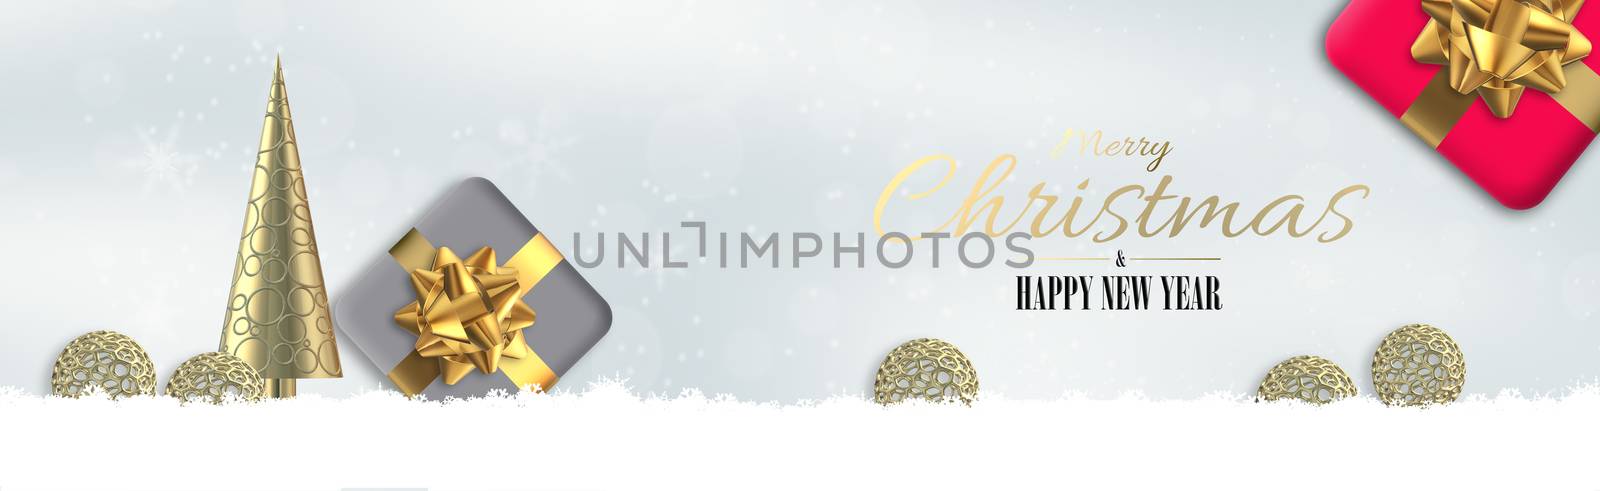 Elegant Christmas banner design with snowflakes, snow, red pink grey 3D gift boxes on pastel grey white background. 3D render. Text Merry Christmas Happy New Year. Beautiful abstract Xmas invitation